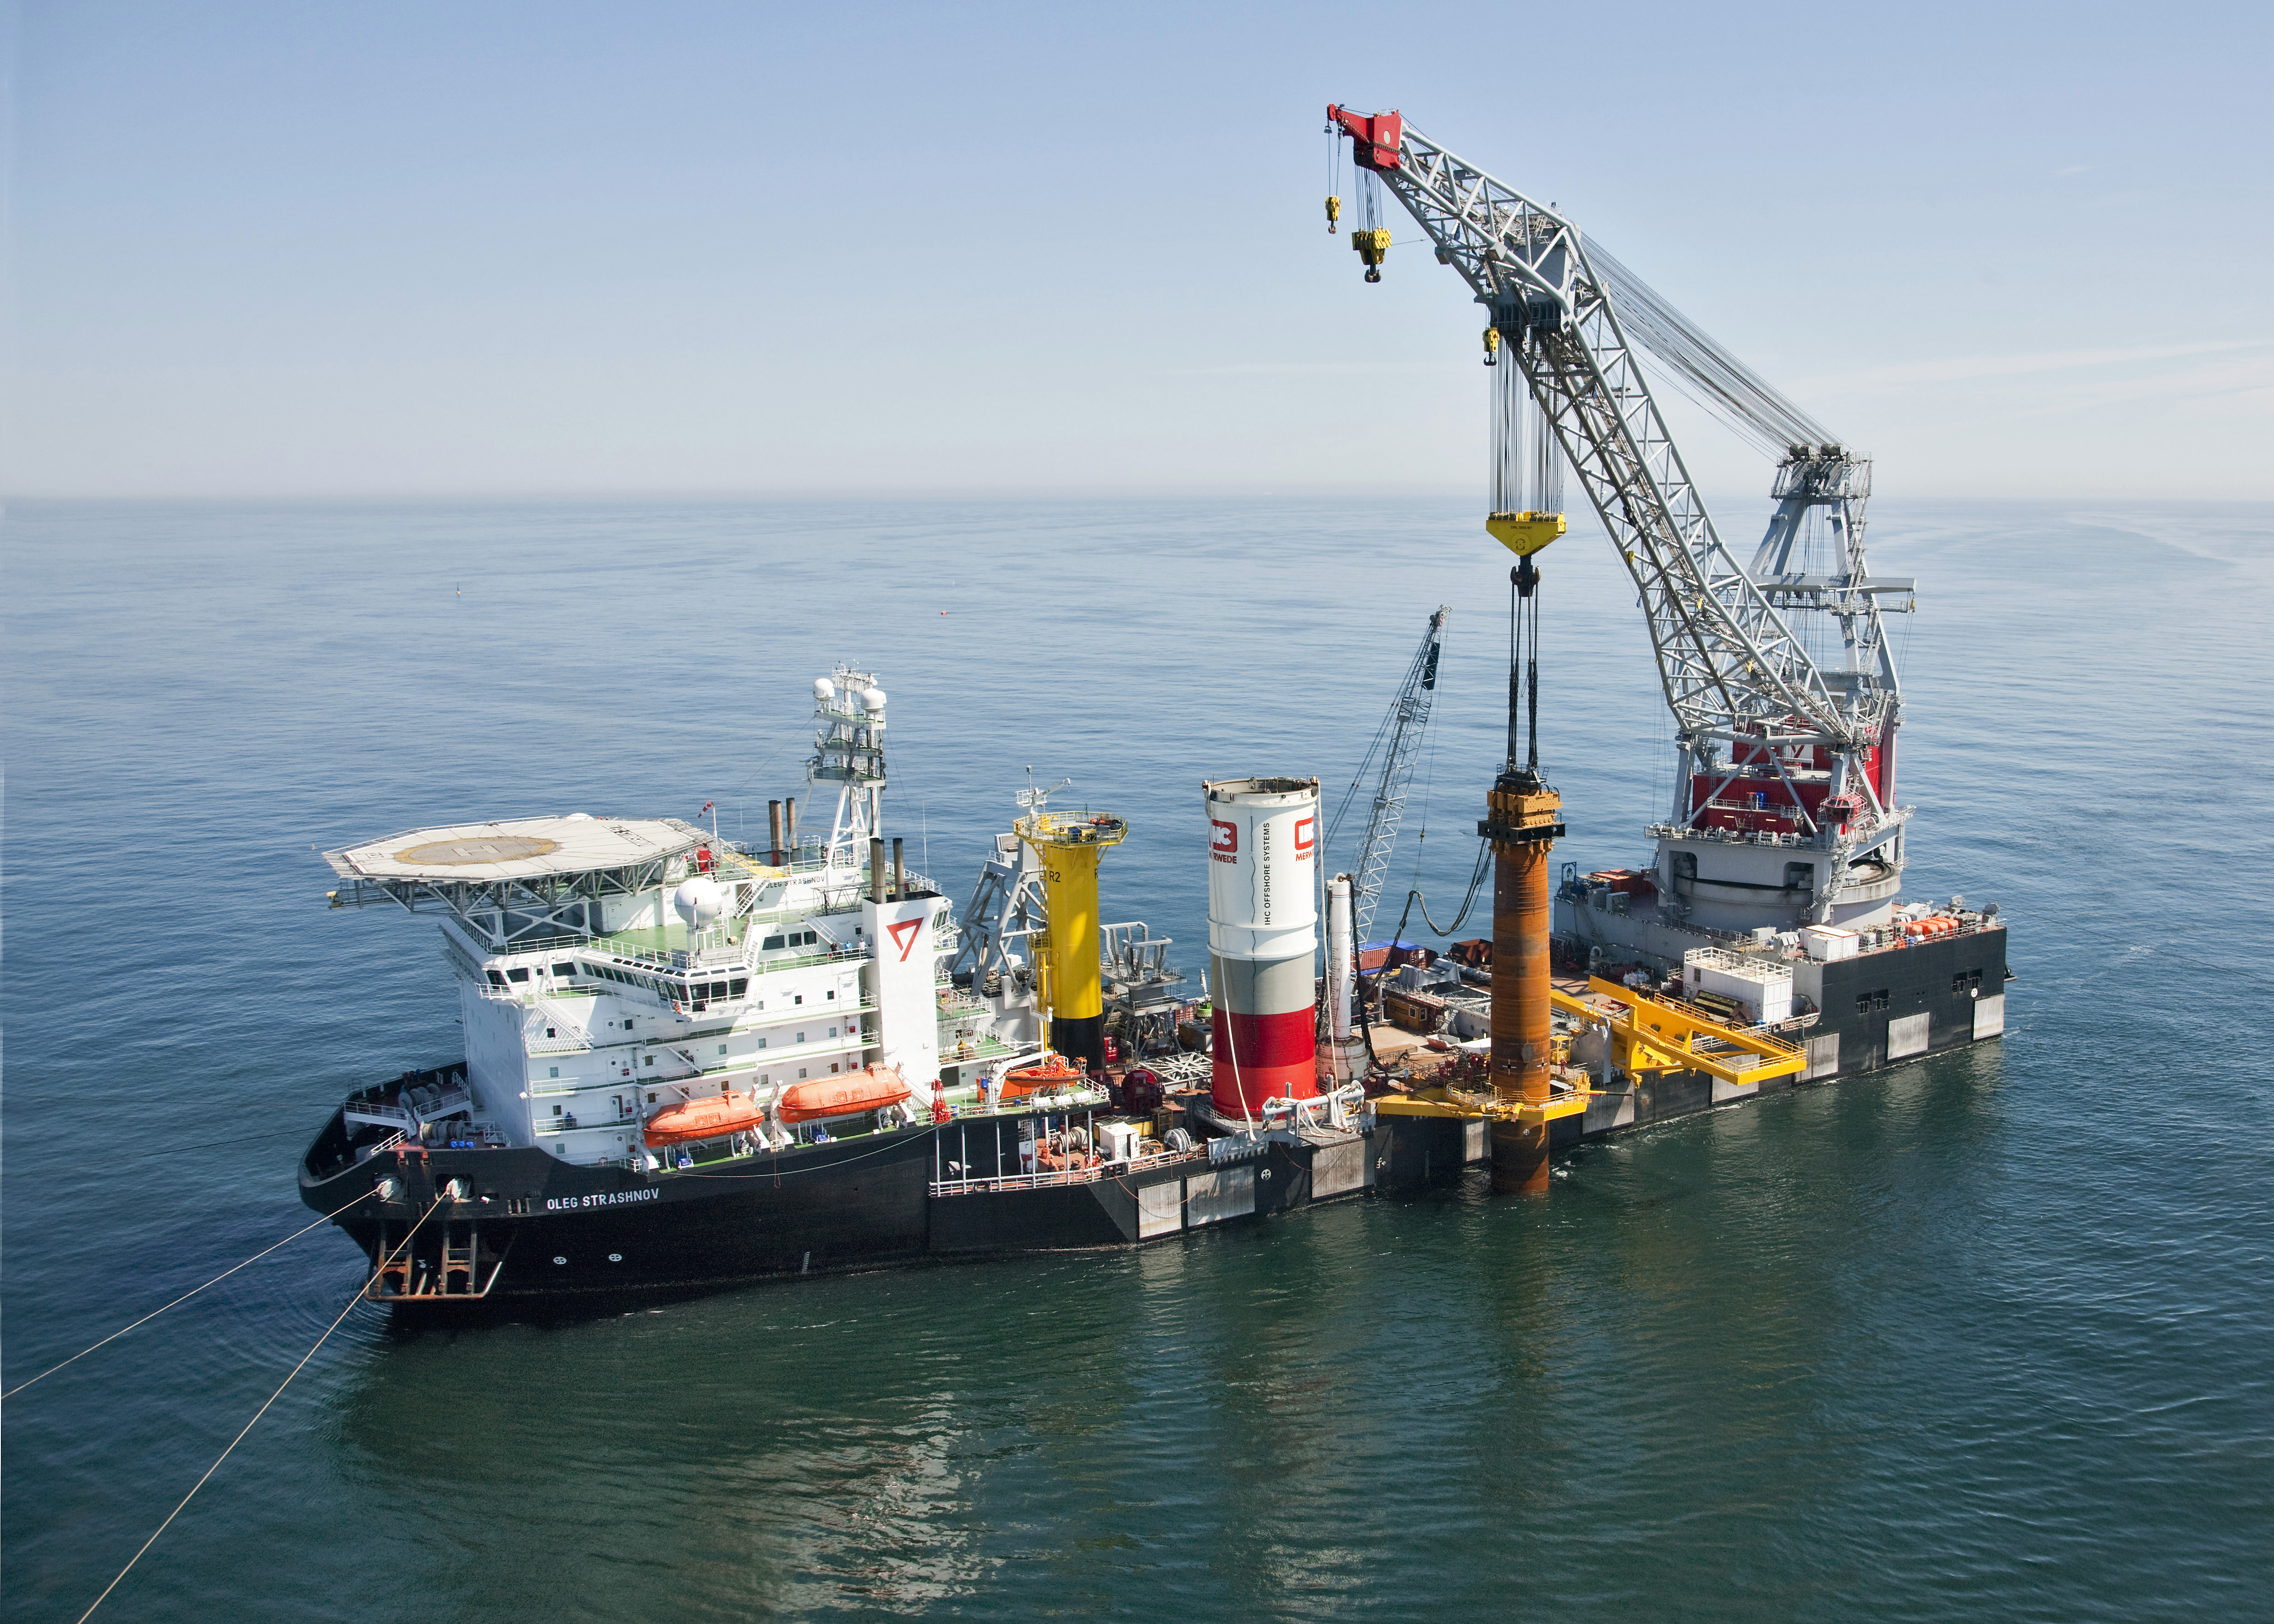 A photo of a vessel at sea installing Riffgat monopiles with vibro tool